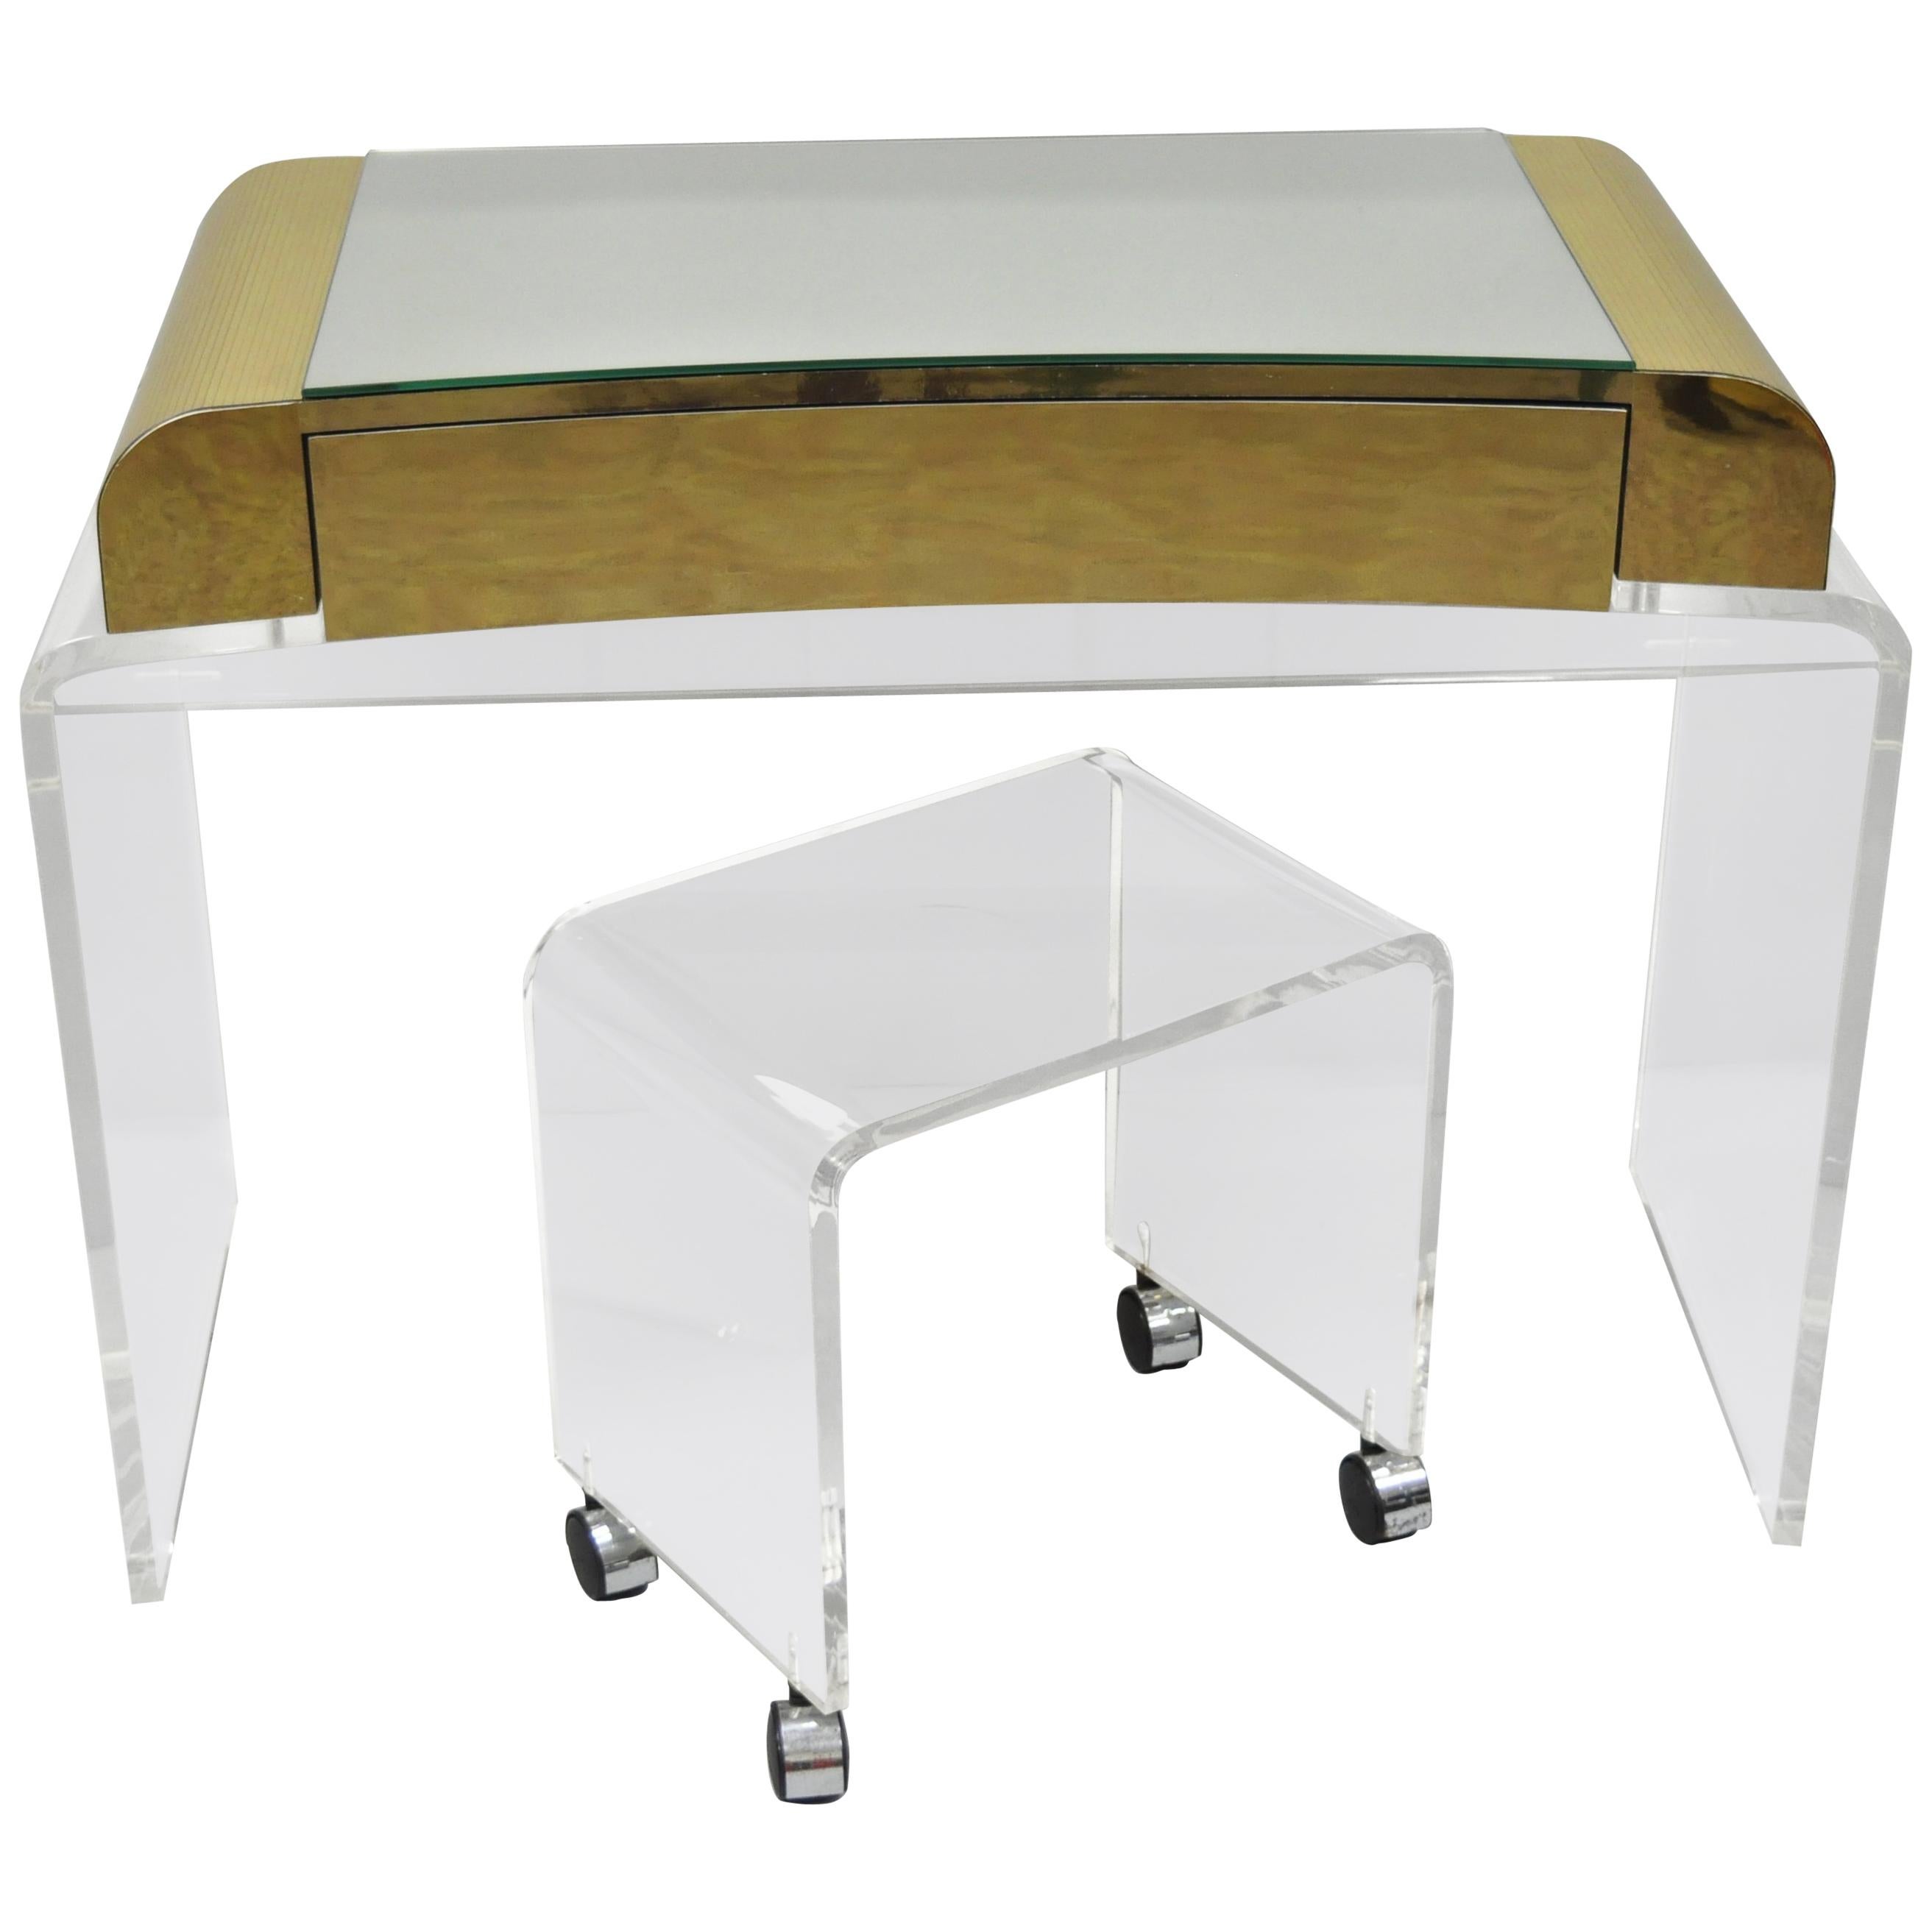 Lucite Waterfall Mirrored Vanity Table and Vanity Bench Brass Trim Chrome Wheels